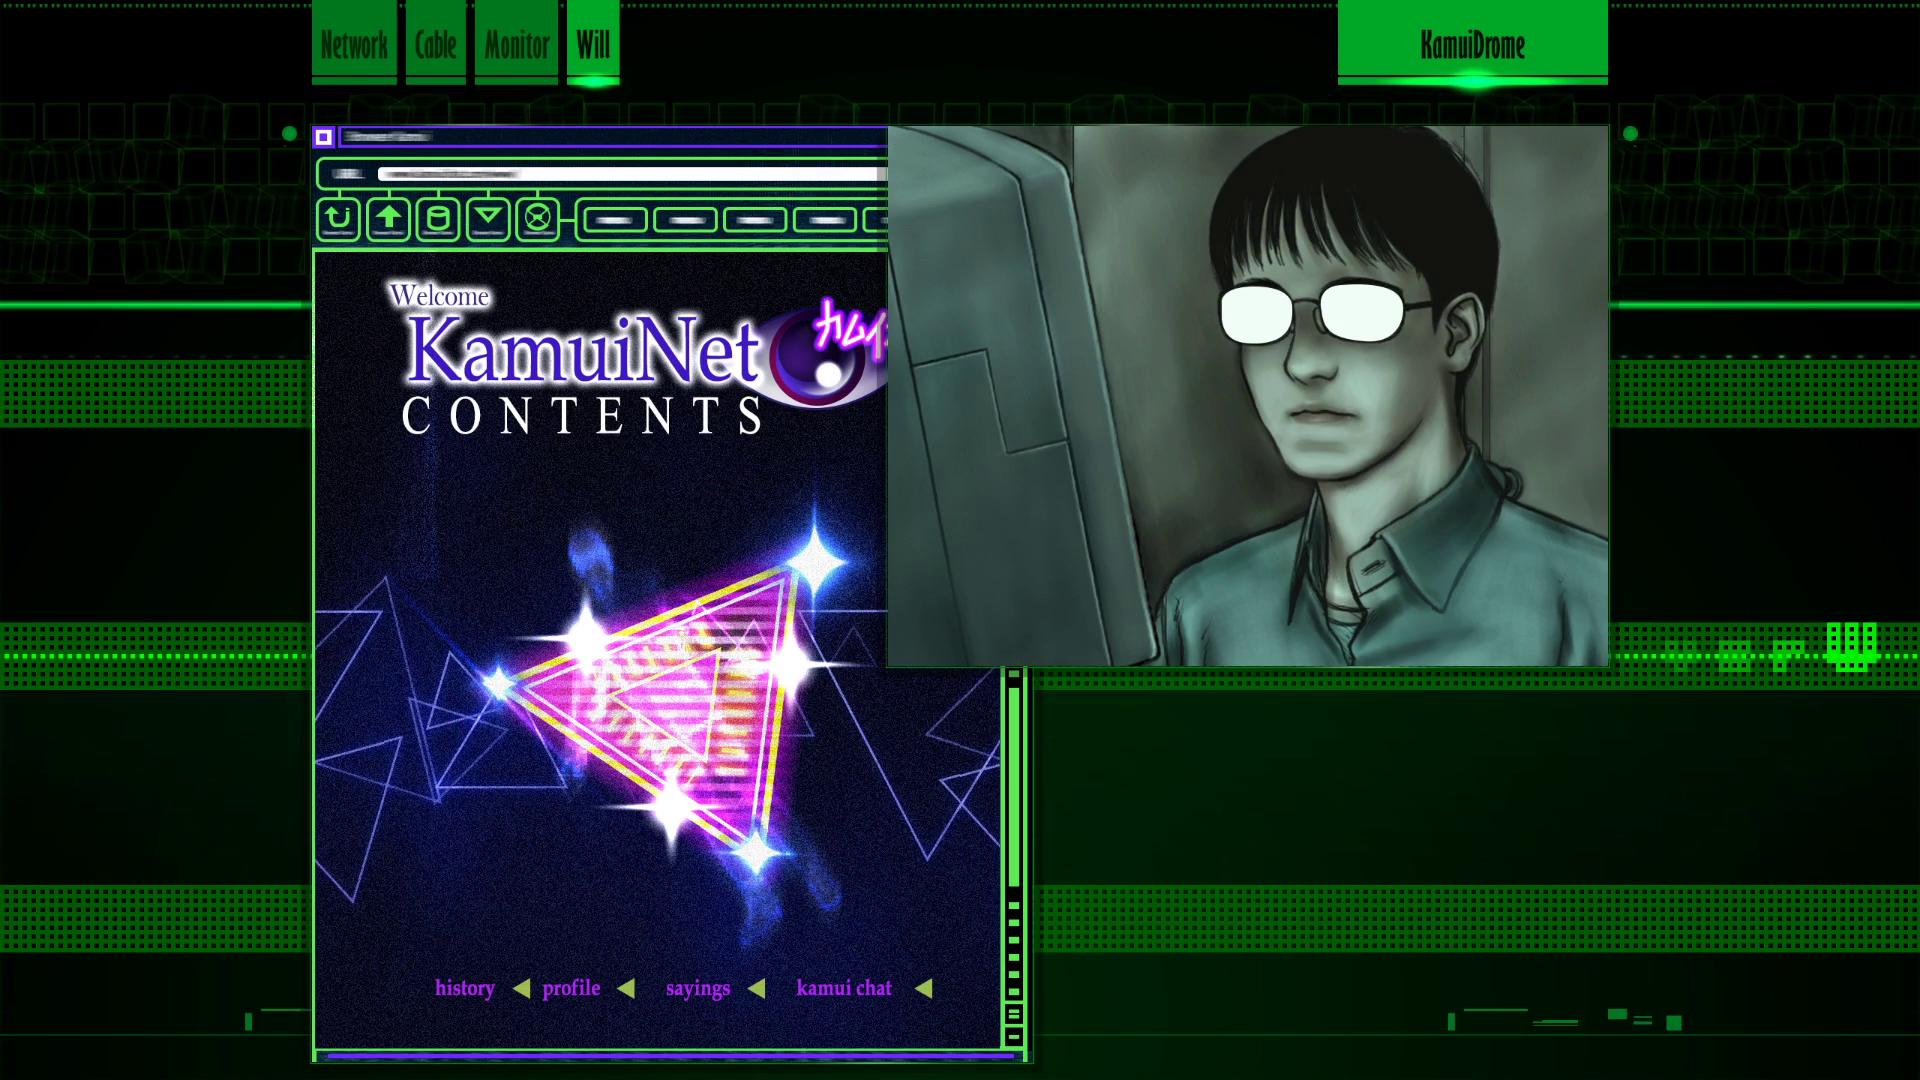 Screenshot from "KamuiDrome." The left window shows the main page of Kamui Net. The right window shows Furuya at his computer, glasses ominously glowing in the light of the computer monitor.